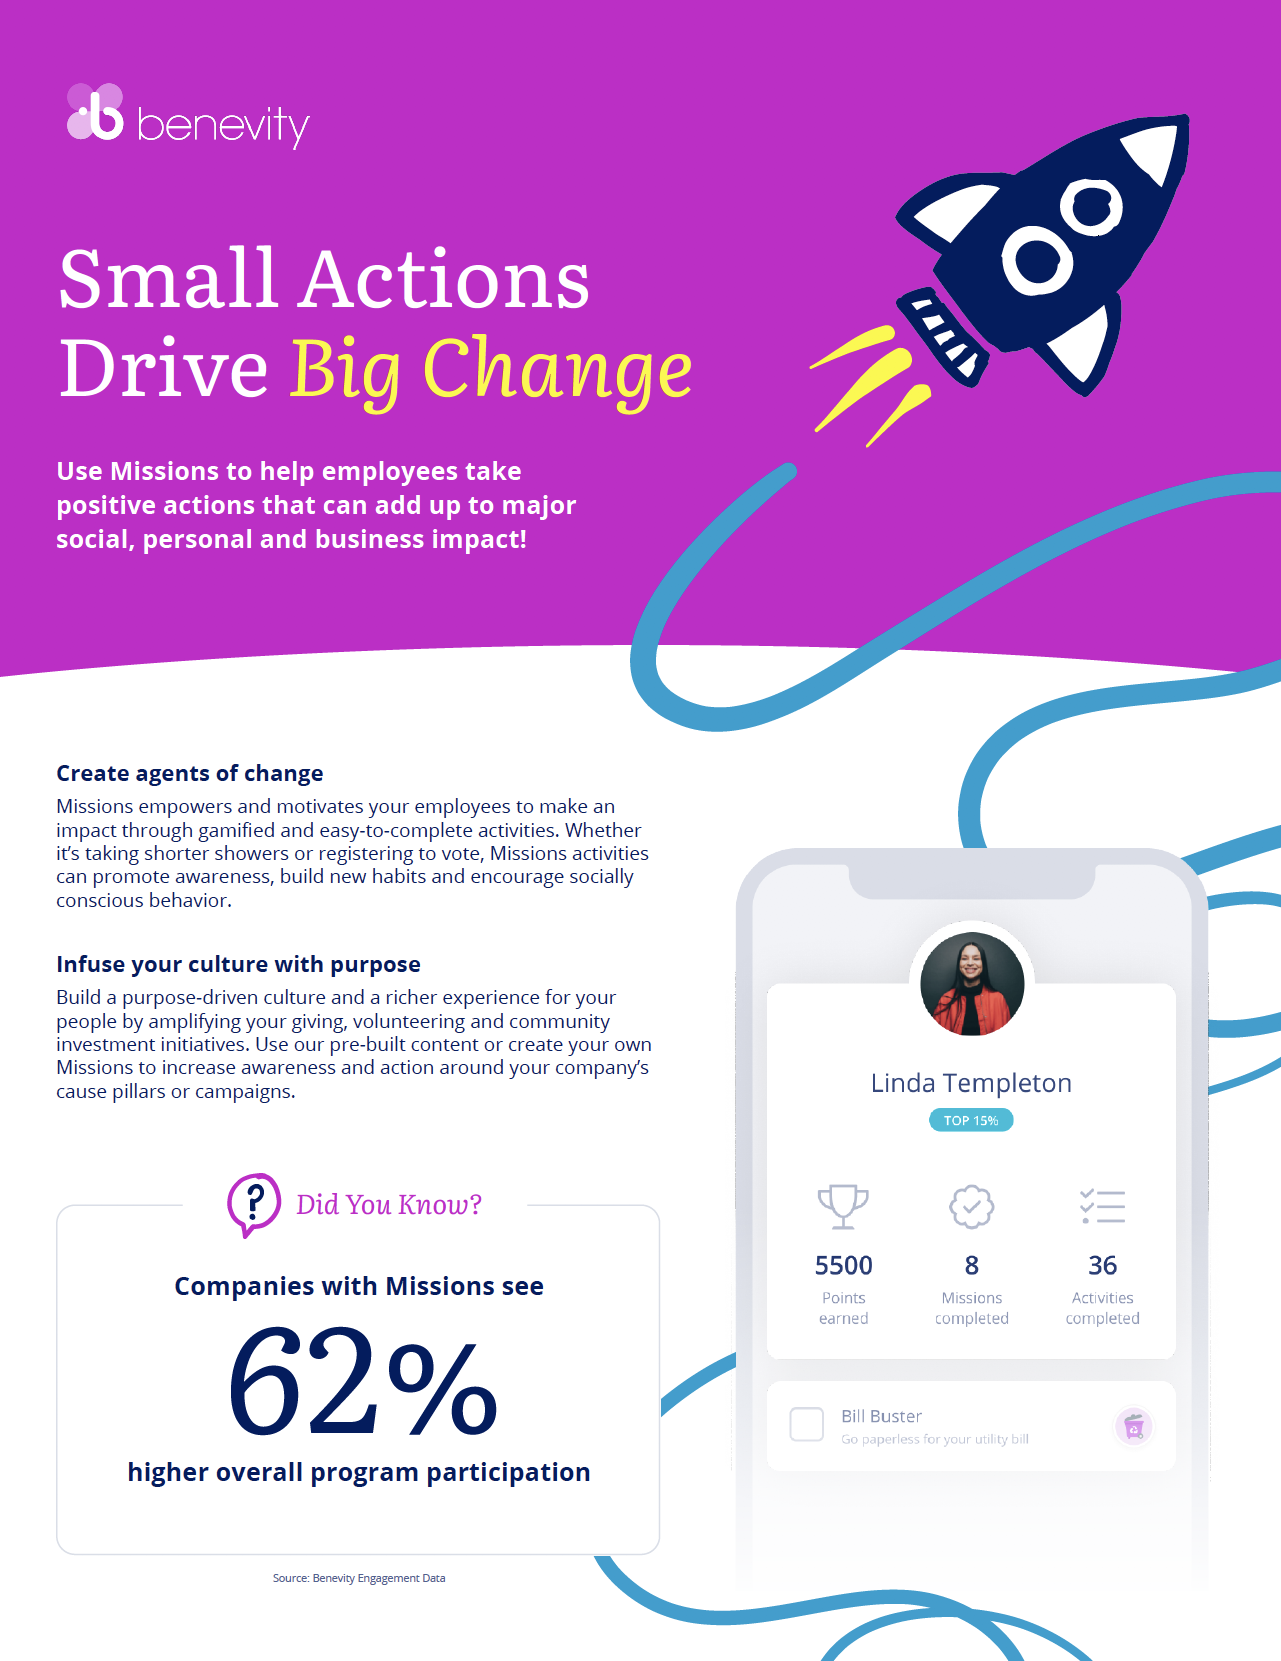 Small Actions Image